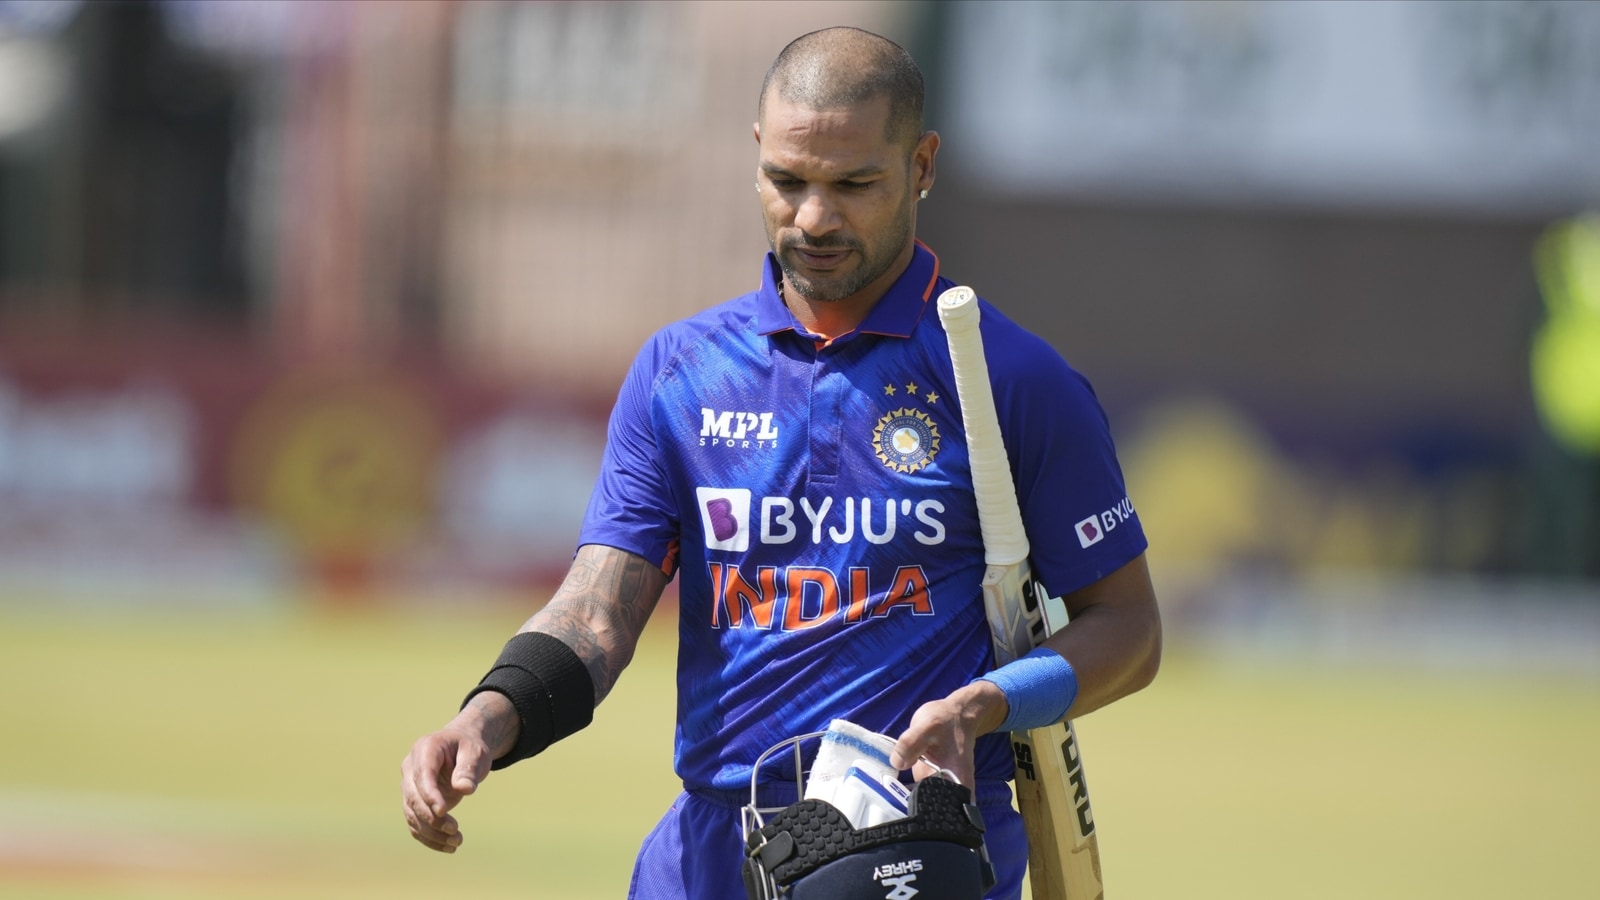 IND vs SA: Shikhar Dhawan to lead India in ODIs against South Africa